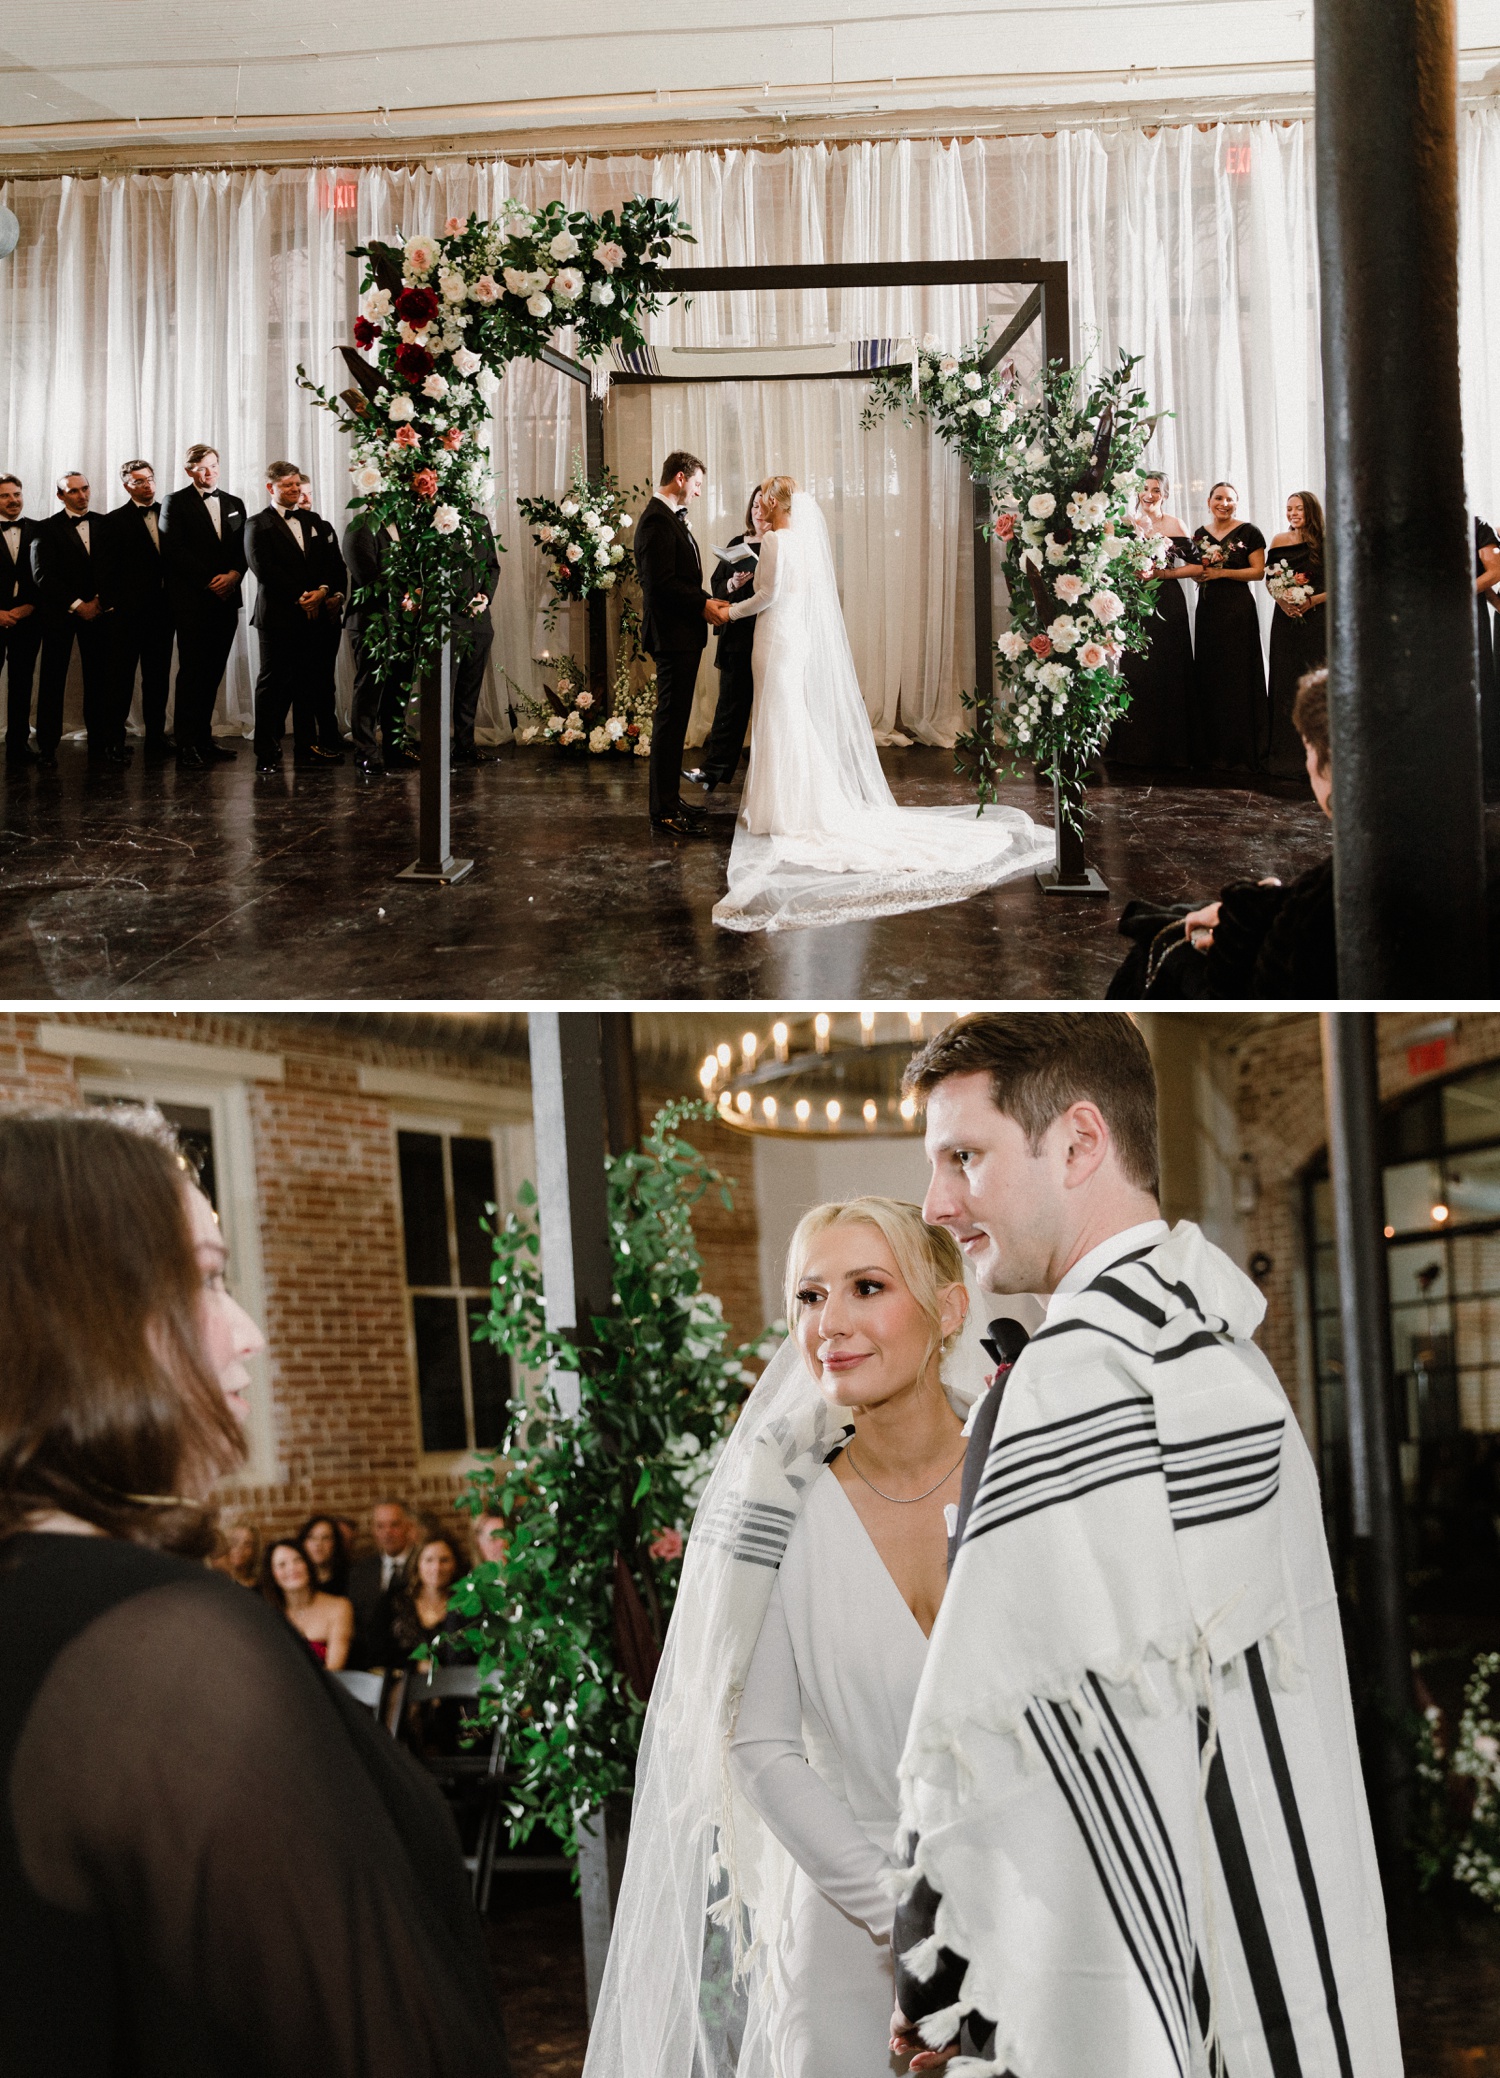 Bride and groom wearing a prayer shawl at a Jewish wedding ceremony in Houston